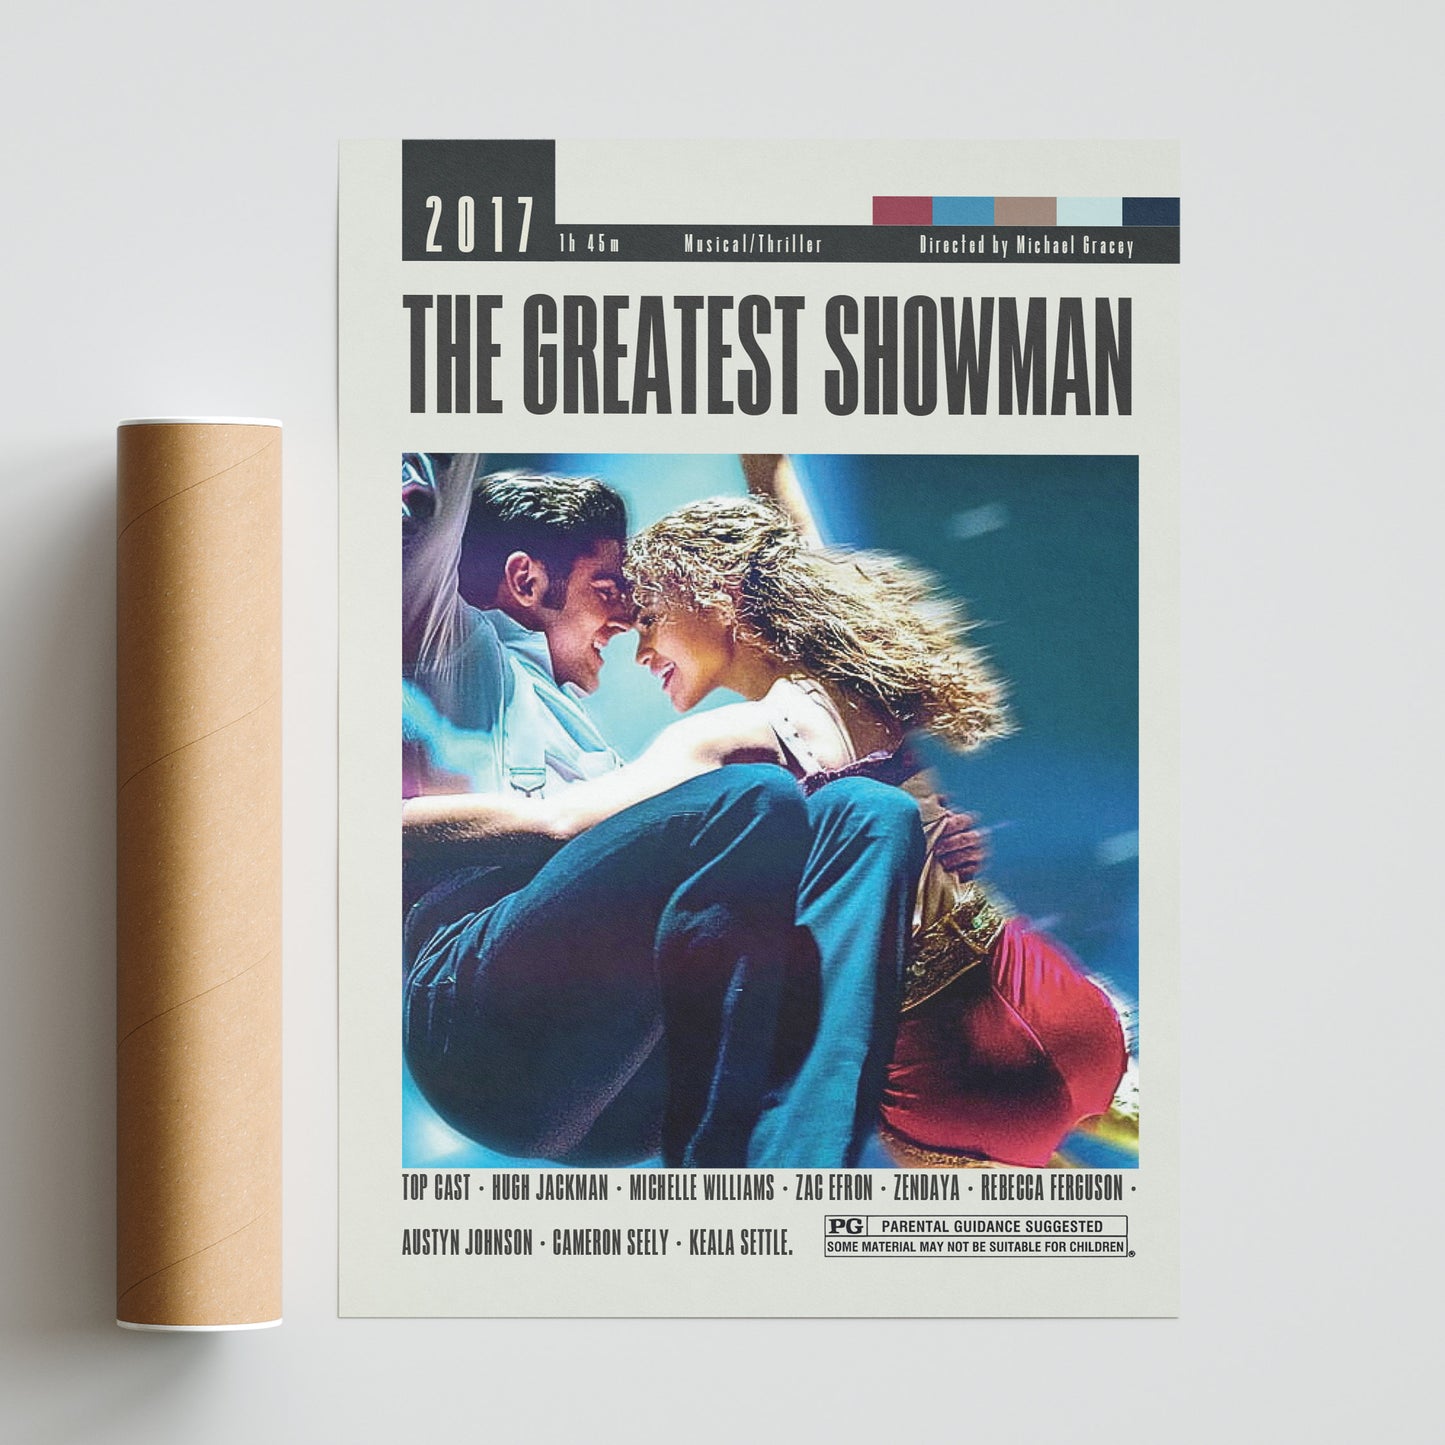 This minimalist movie poster for "The Greatest Showman", directed by Michael Gracey, showcases retro-style artwork that would make a stylish addition to any home decor. Printed on high-quality paper, this custom poster is perfect for fans of the film looking to add a touch of vintage charm to their walls